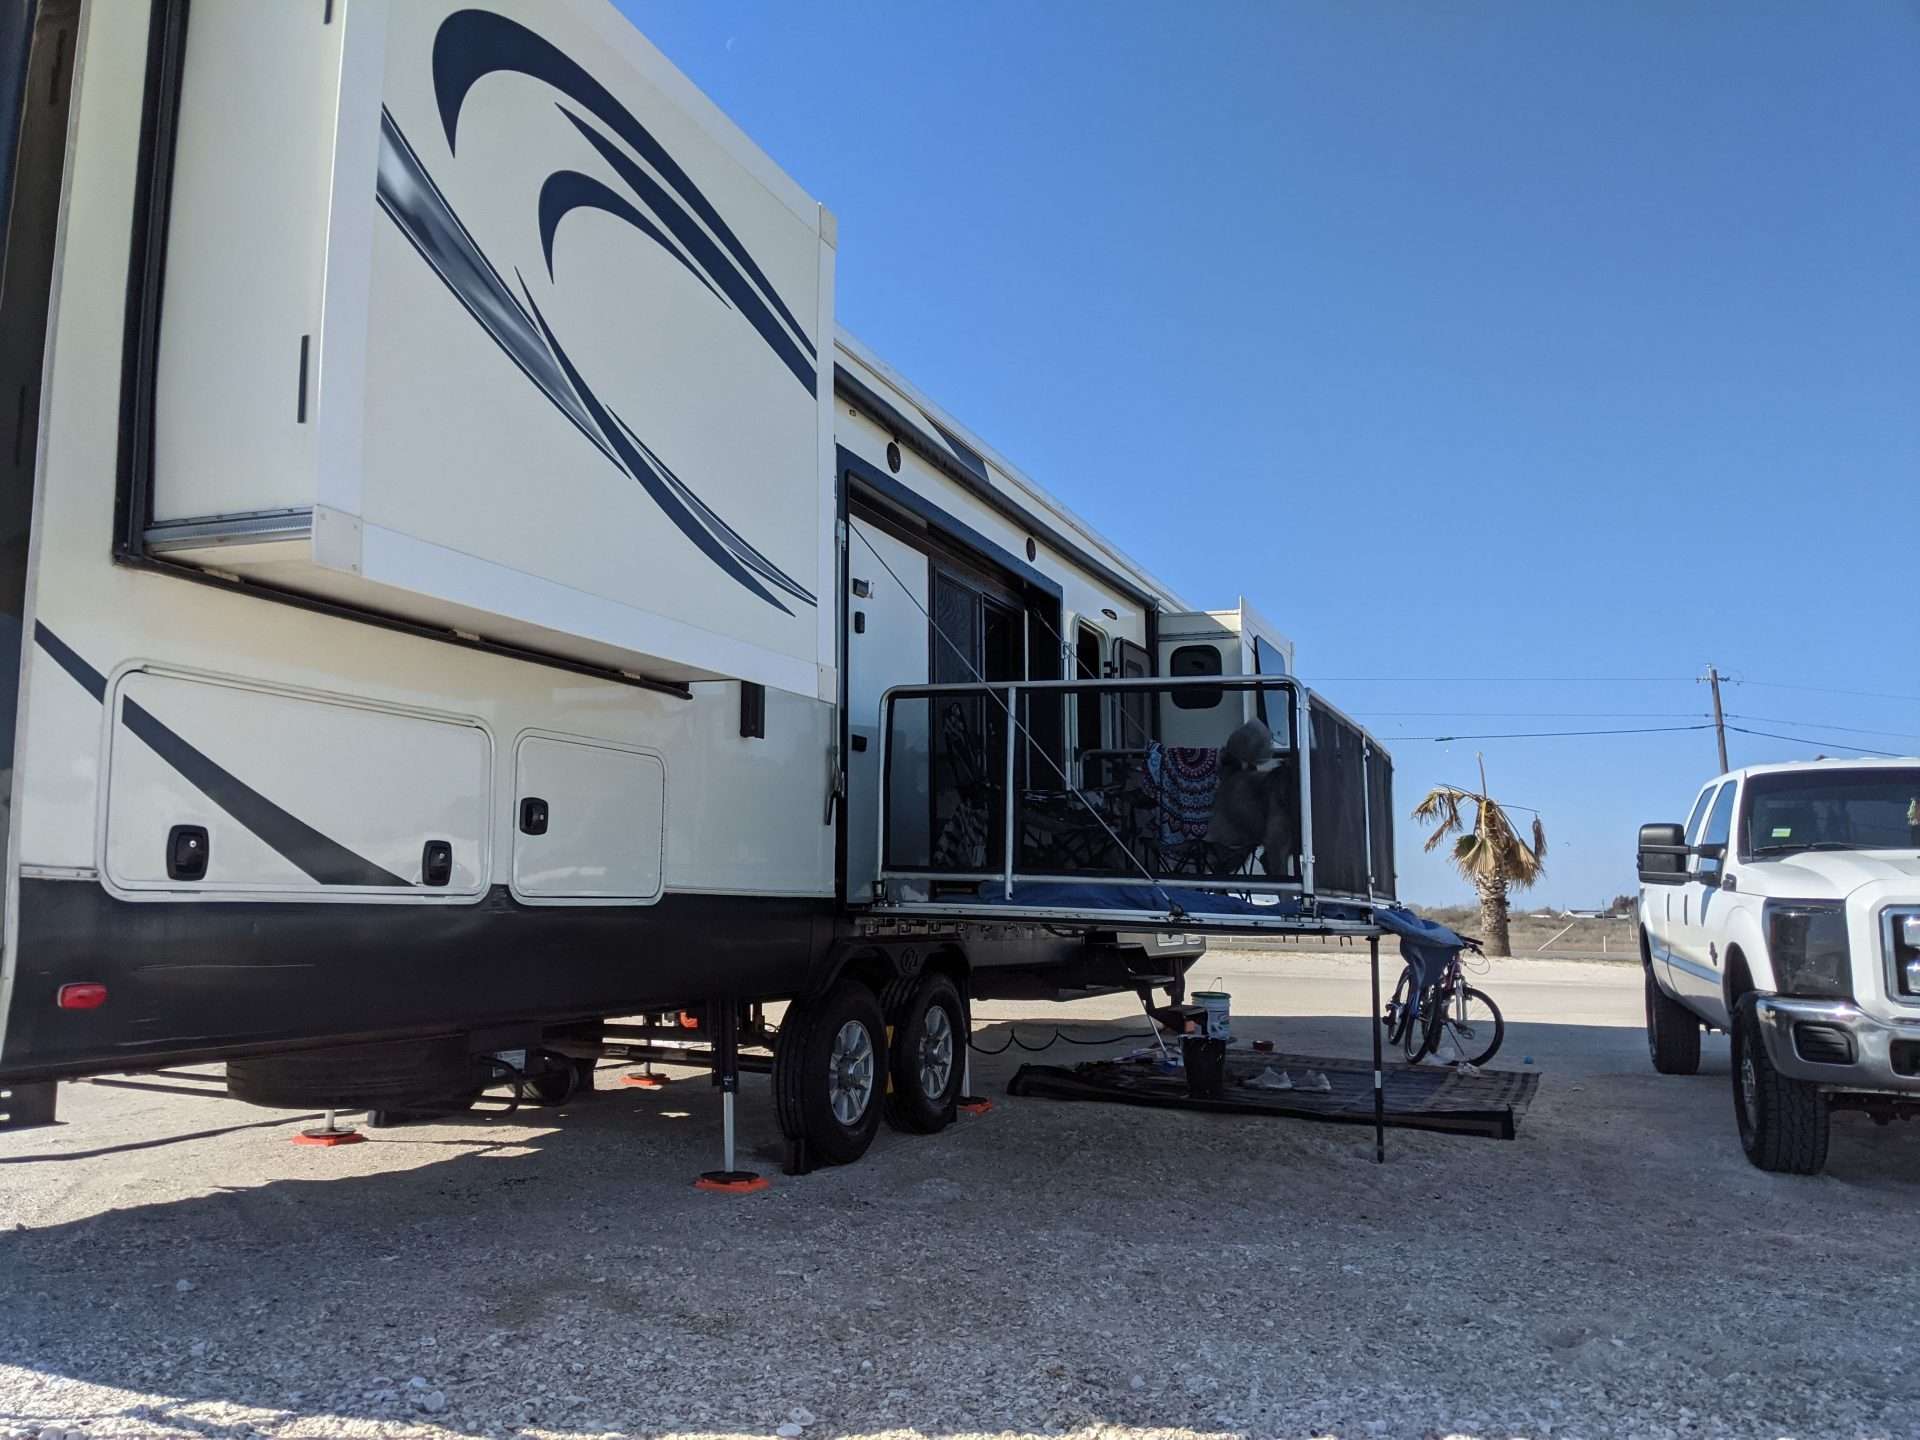 RV parked with leveling jacks installed